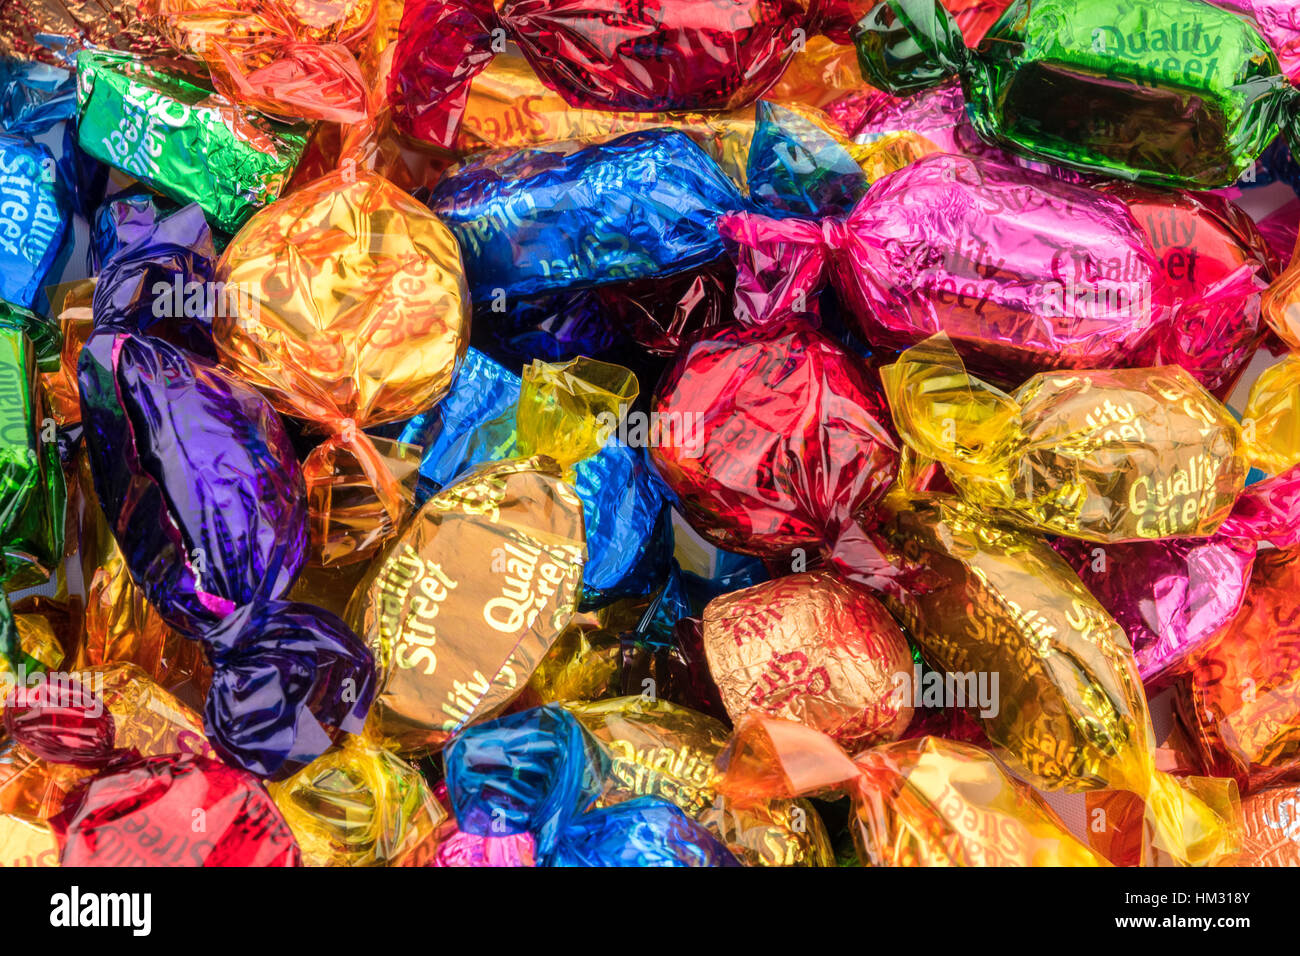 Quality street chocolate chocolates hi-res stock photography and images -  Alamy